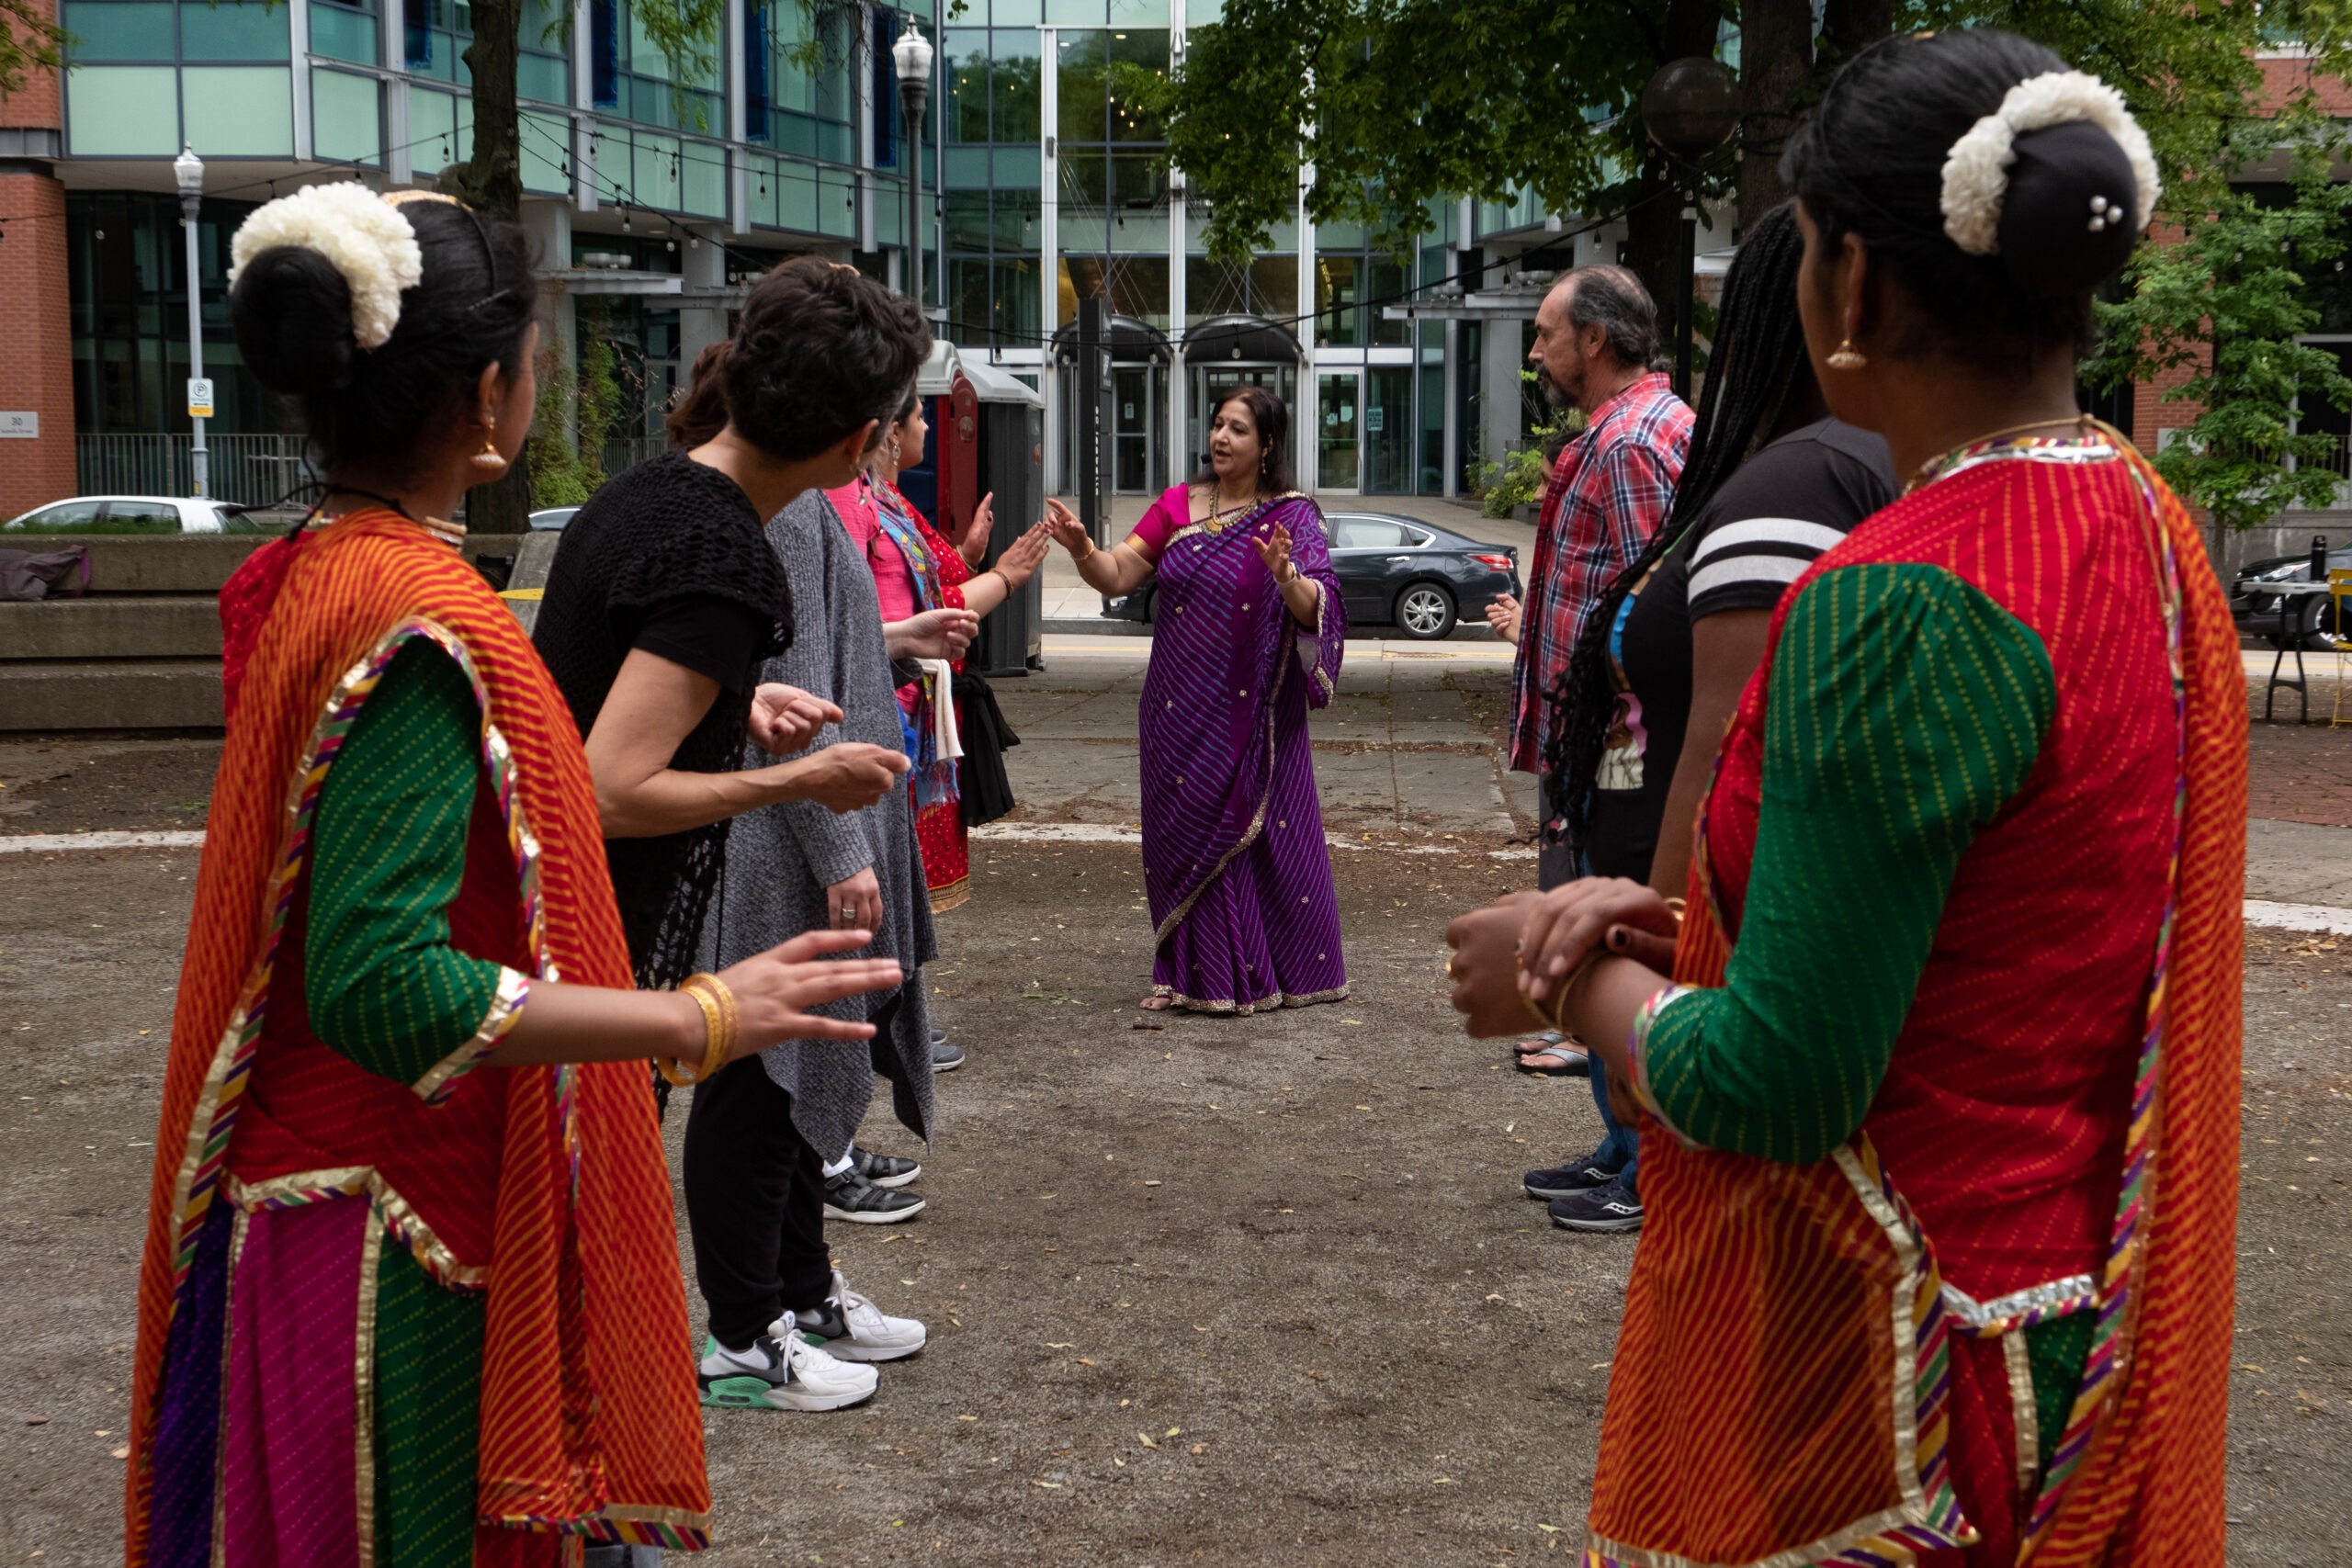 Sanskruti School of Indian Dance and Music leads an outdoor class at Allegheny Landing, summer 2022.